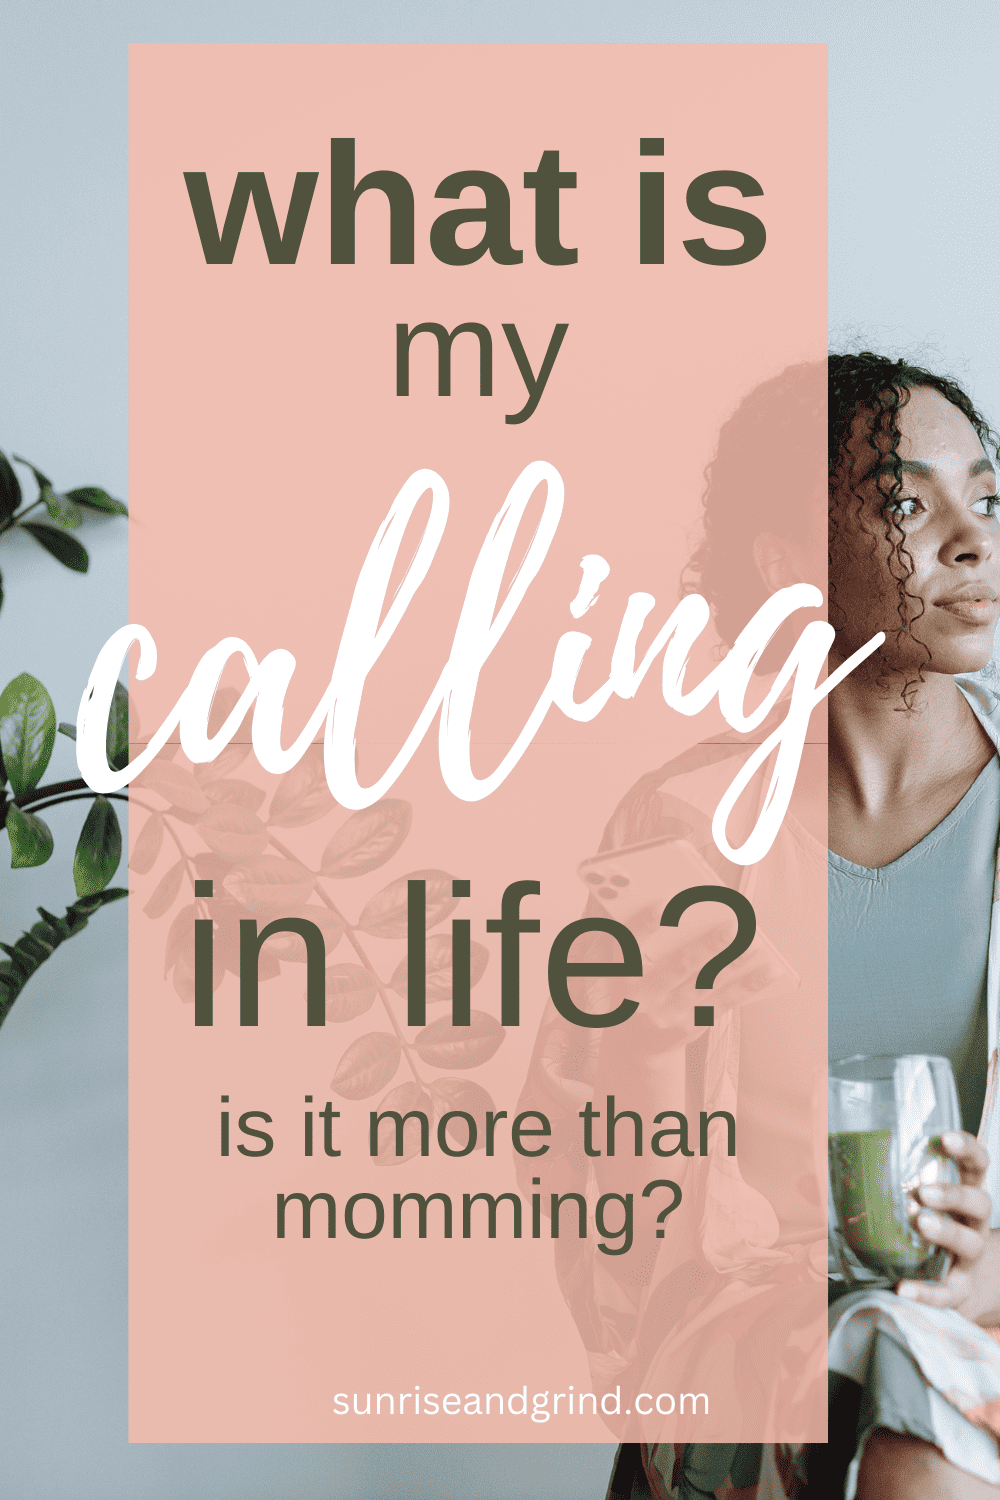 what-is-my-calling-in-life-ponders-this-christian-mom